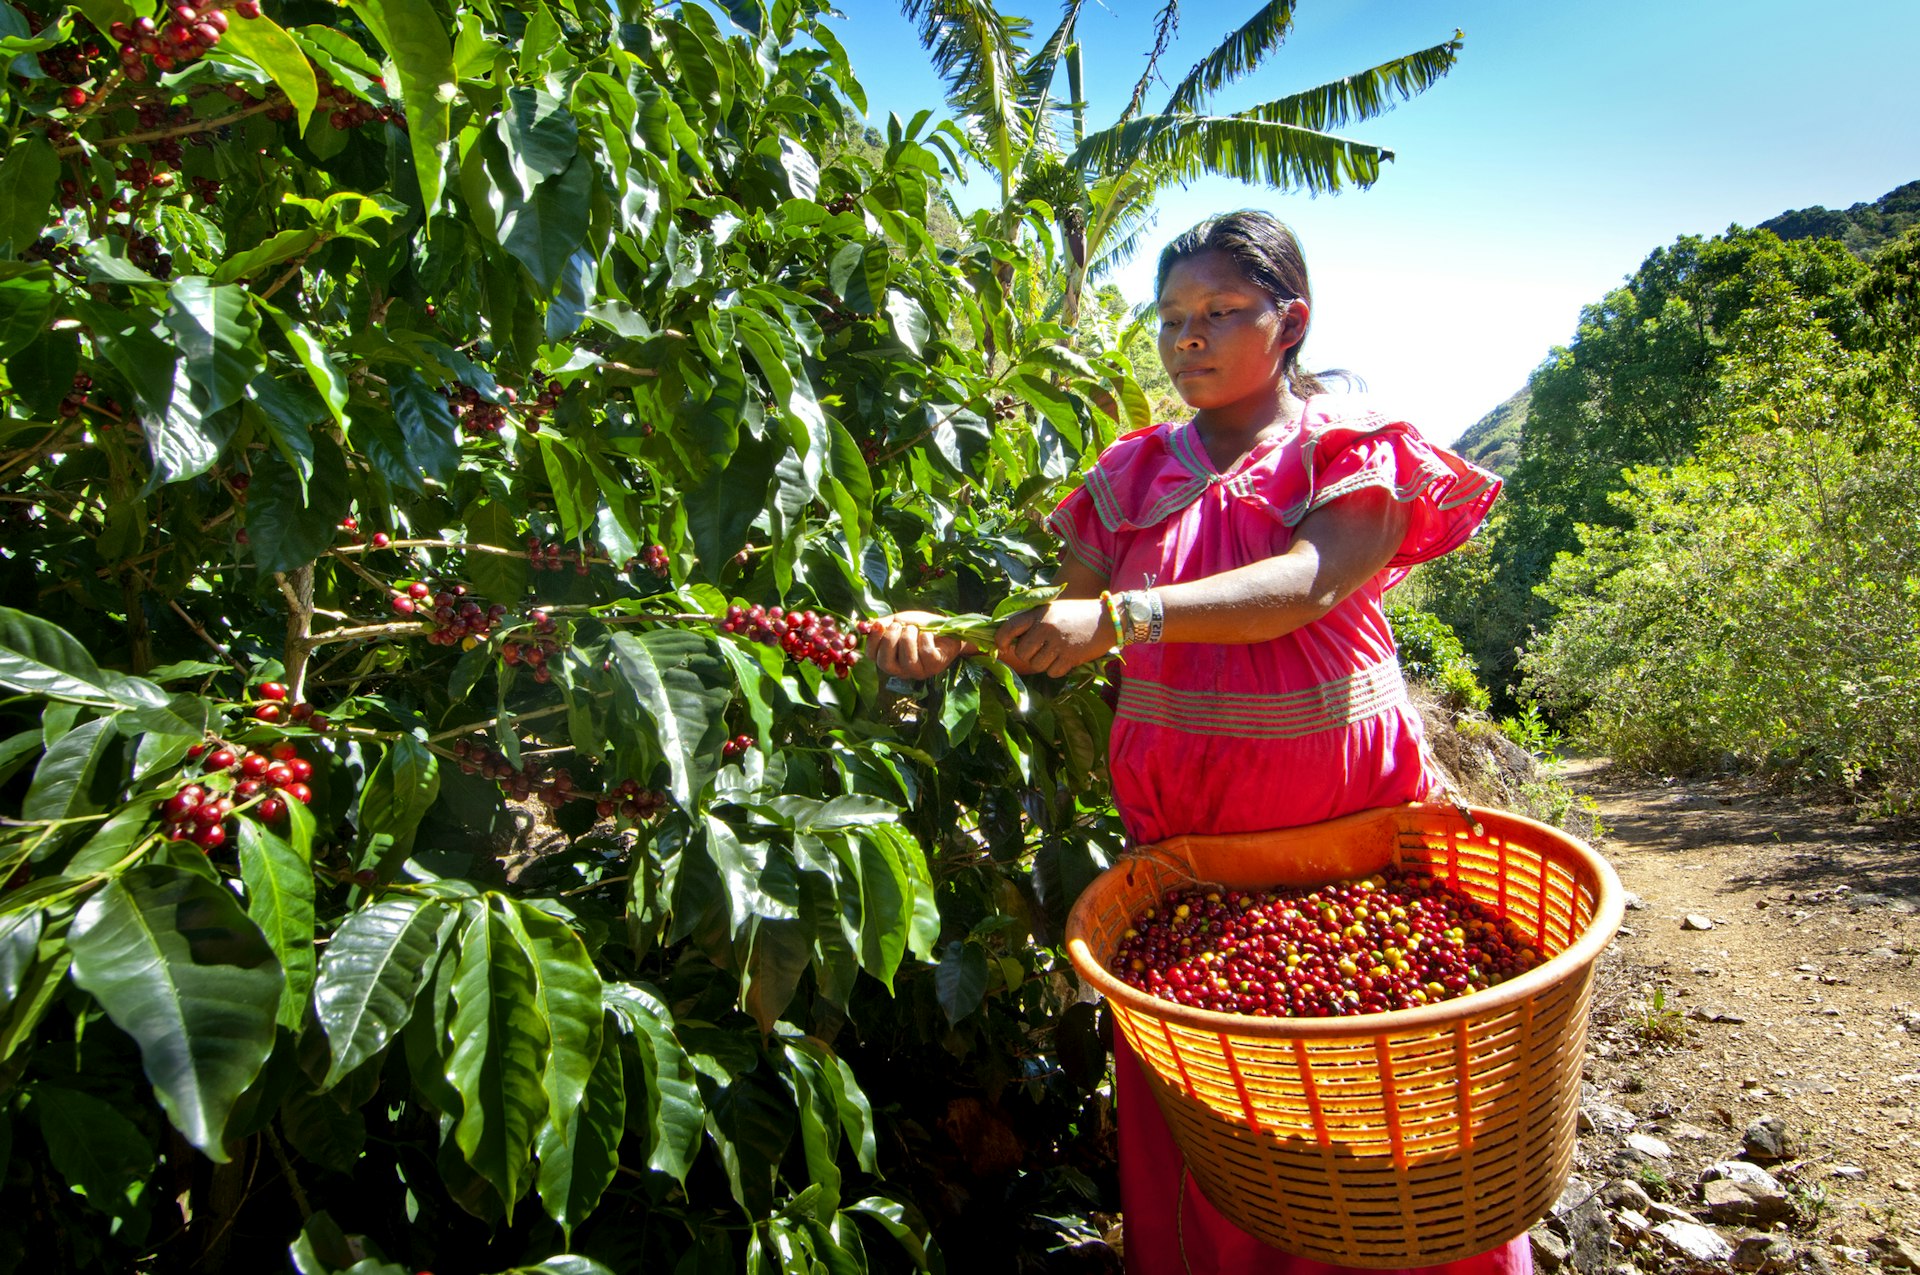 A woman, wearing traditional Panamian dress, picks coffee cherries from a bush and drops them into a basket